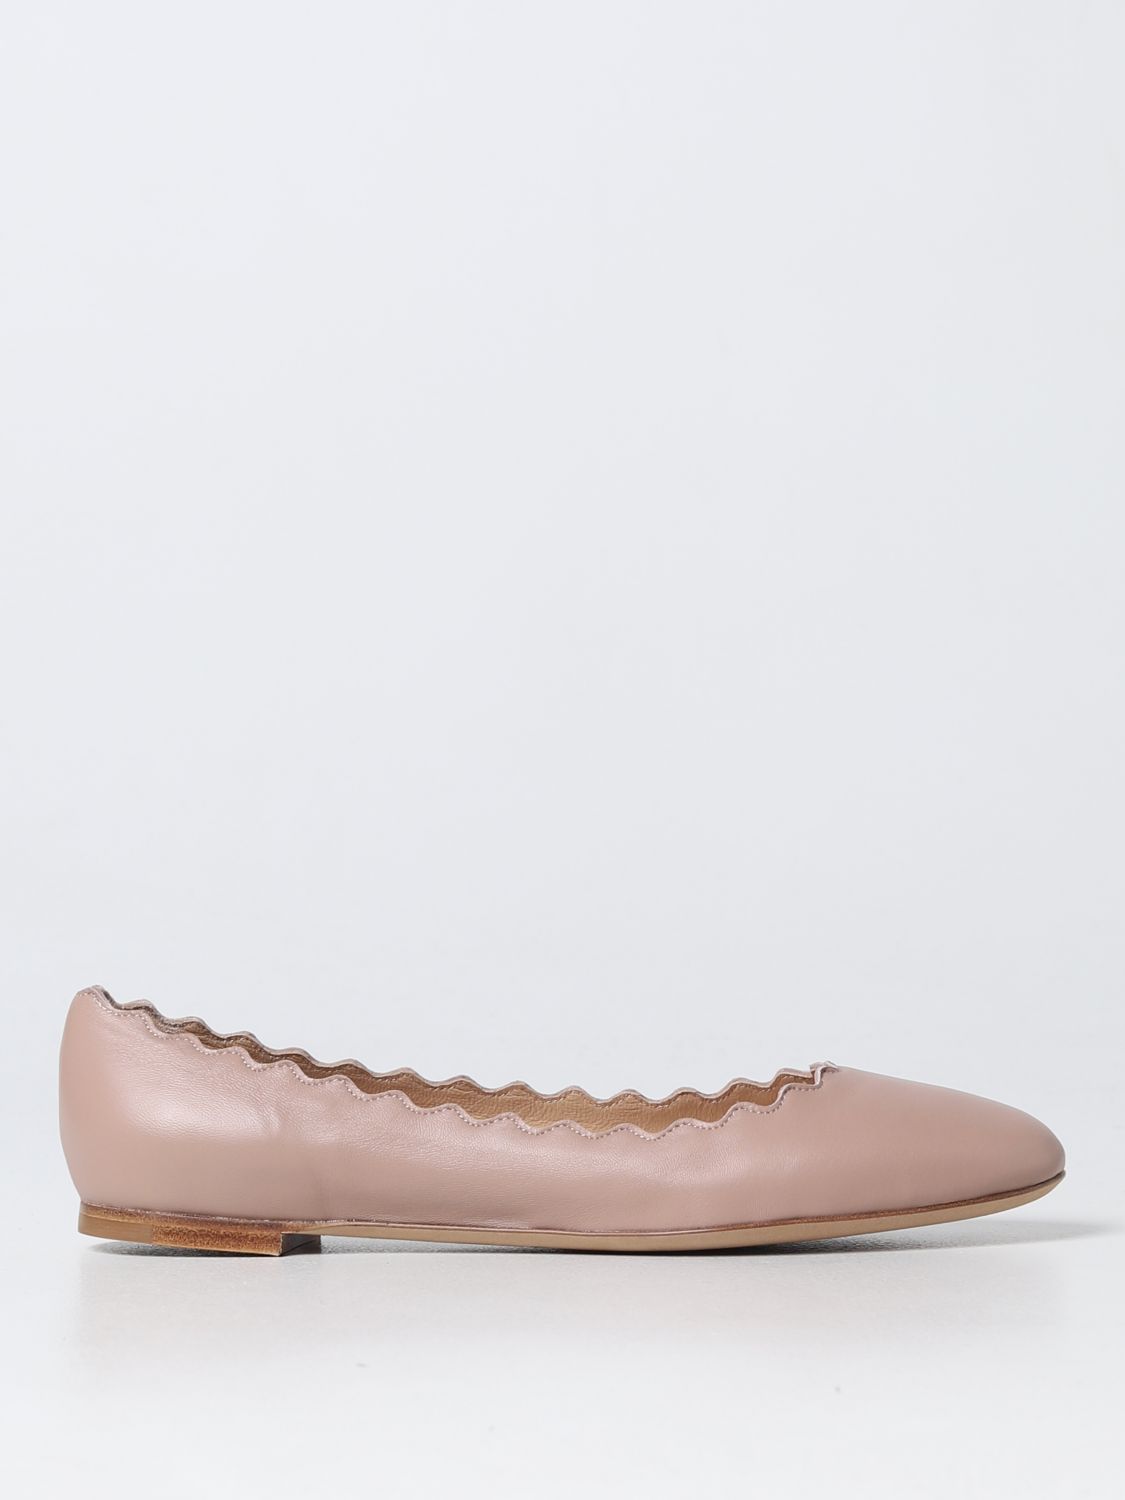 CHLOÉ BALLET FLATS IN LEATHER,D80538010